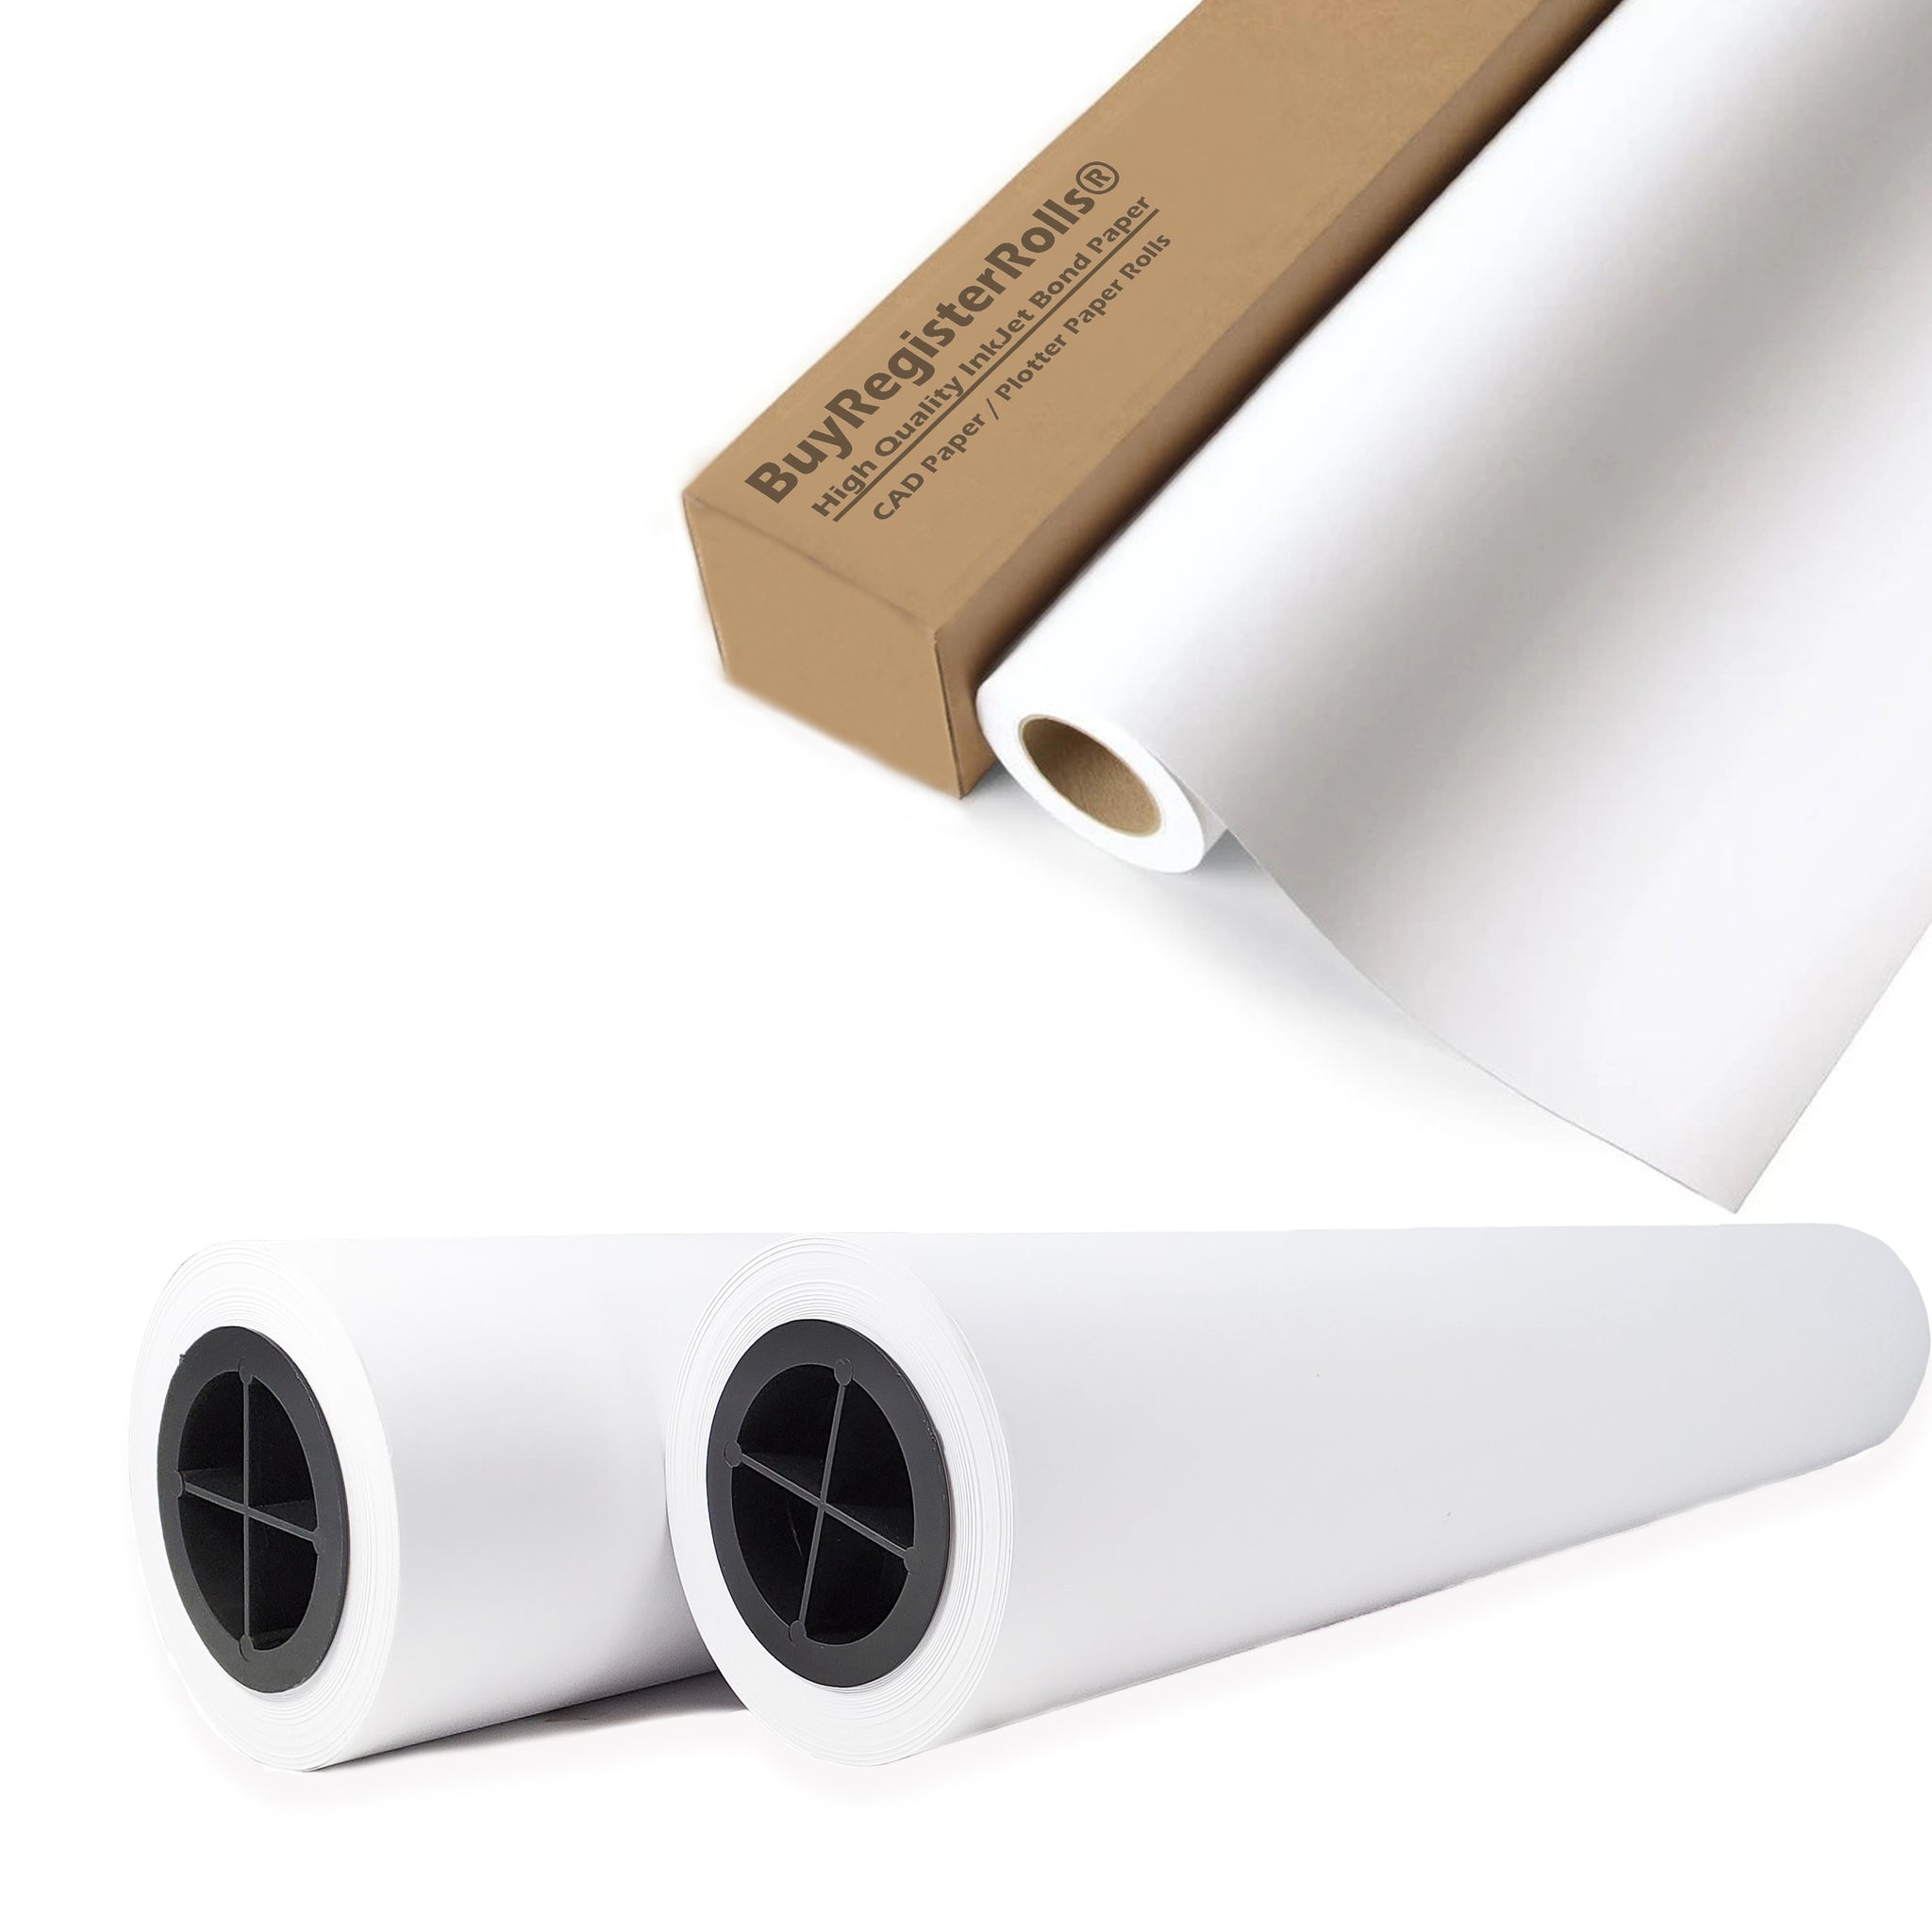 (4 ROLLS) (36” x 150', 20lb) plotter paper 36 x 150 CAD Paper Rolls | Top-Quality Ink Jet Bond Paper Rolls | Ultra-White, Wood-Free 80GSM Plotter Paper For Engineers, Architects, Copy Service Shops